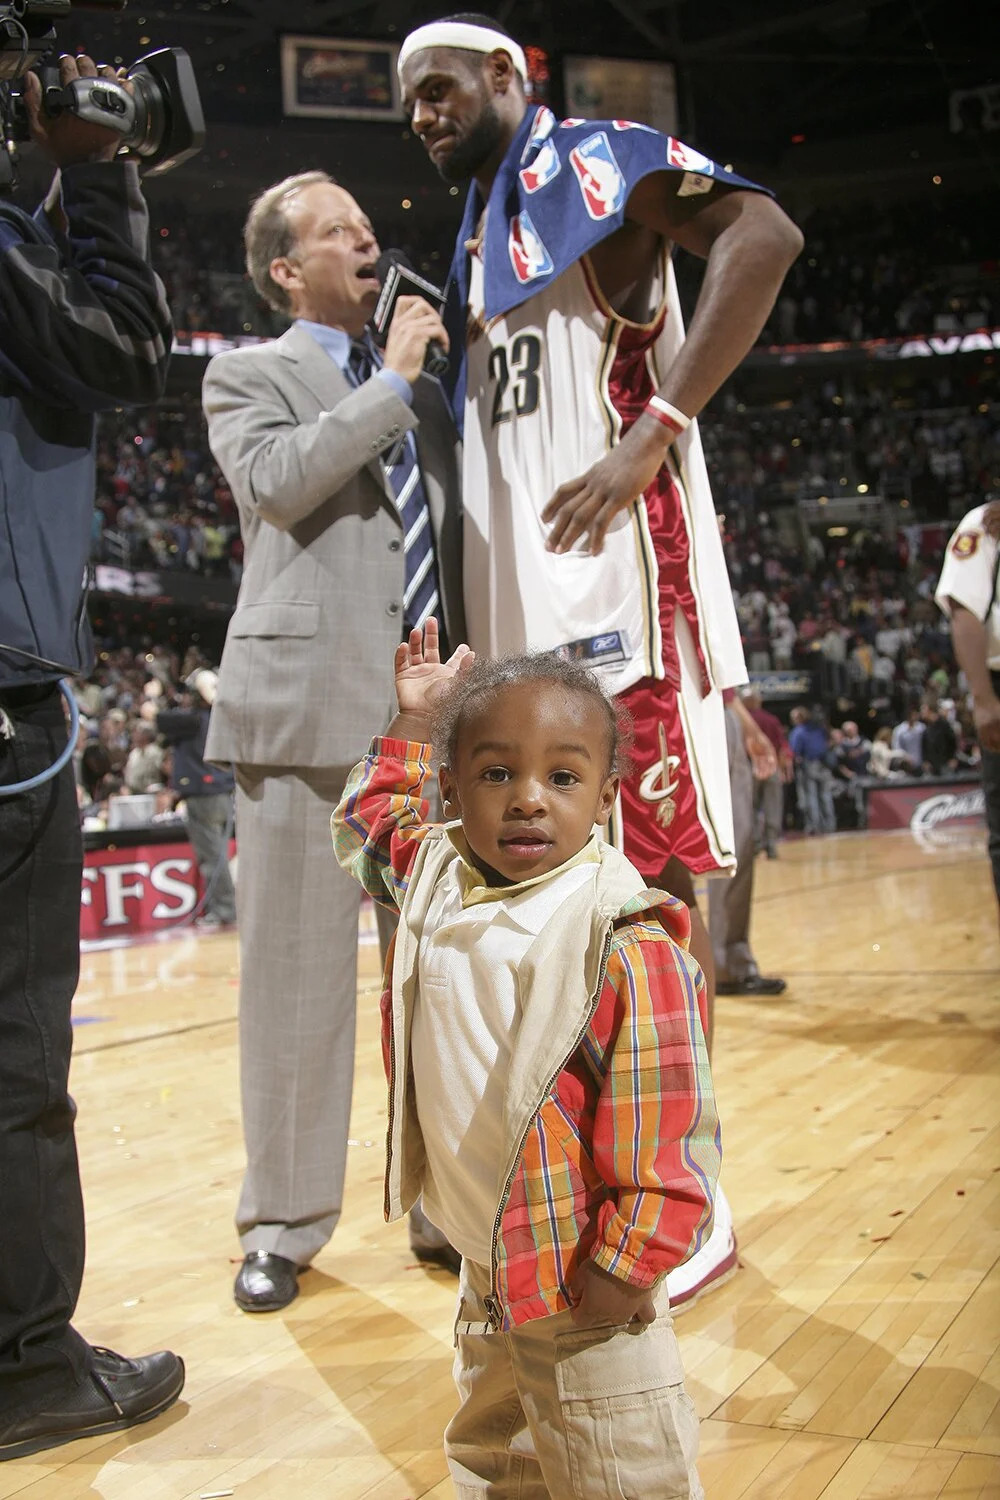 LeBron James #23 of the Cleveland Cavaliers with his son speaks to the media after playing against the Detroit Pistons in game three of the Eastern Conference Semifinals during the 2006 NBA Playoffs at the Quicken Loans Arena on May 13, 2006 in Cleveland,Ohio.